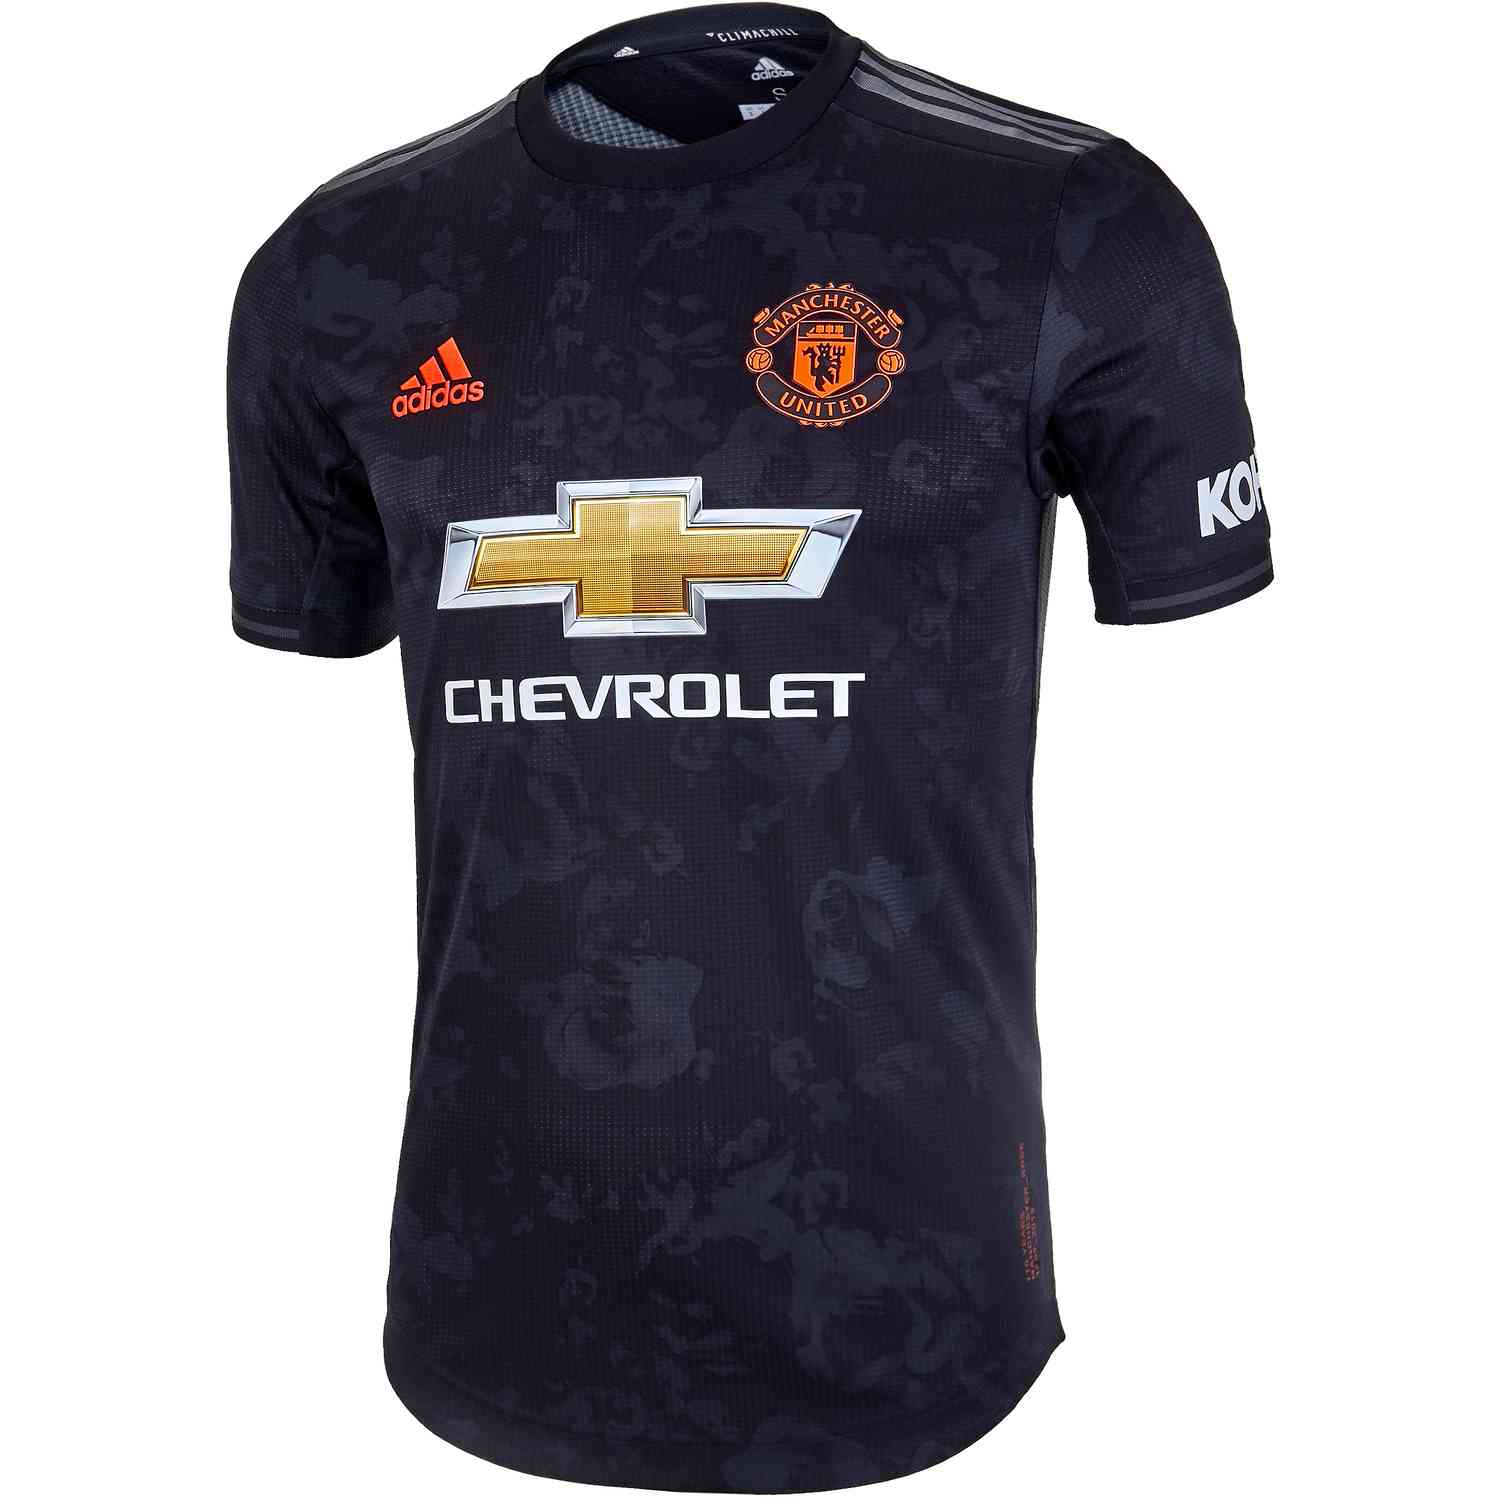 manchester united authentic shirt